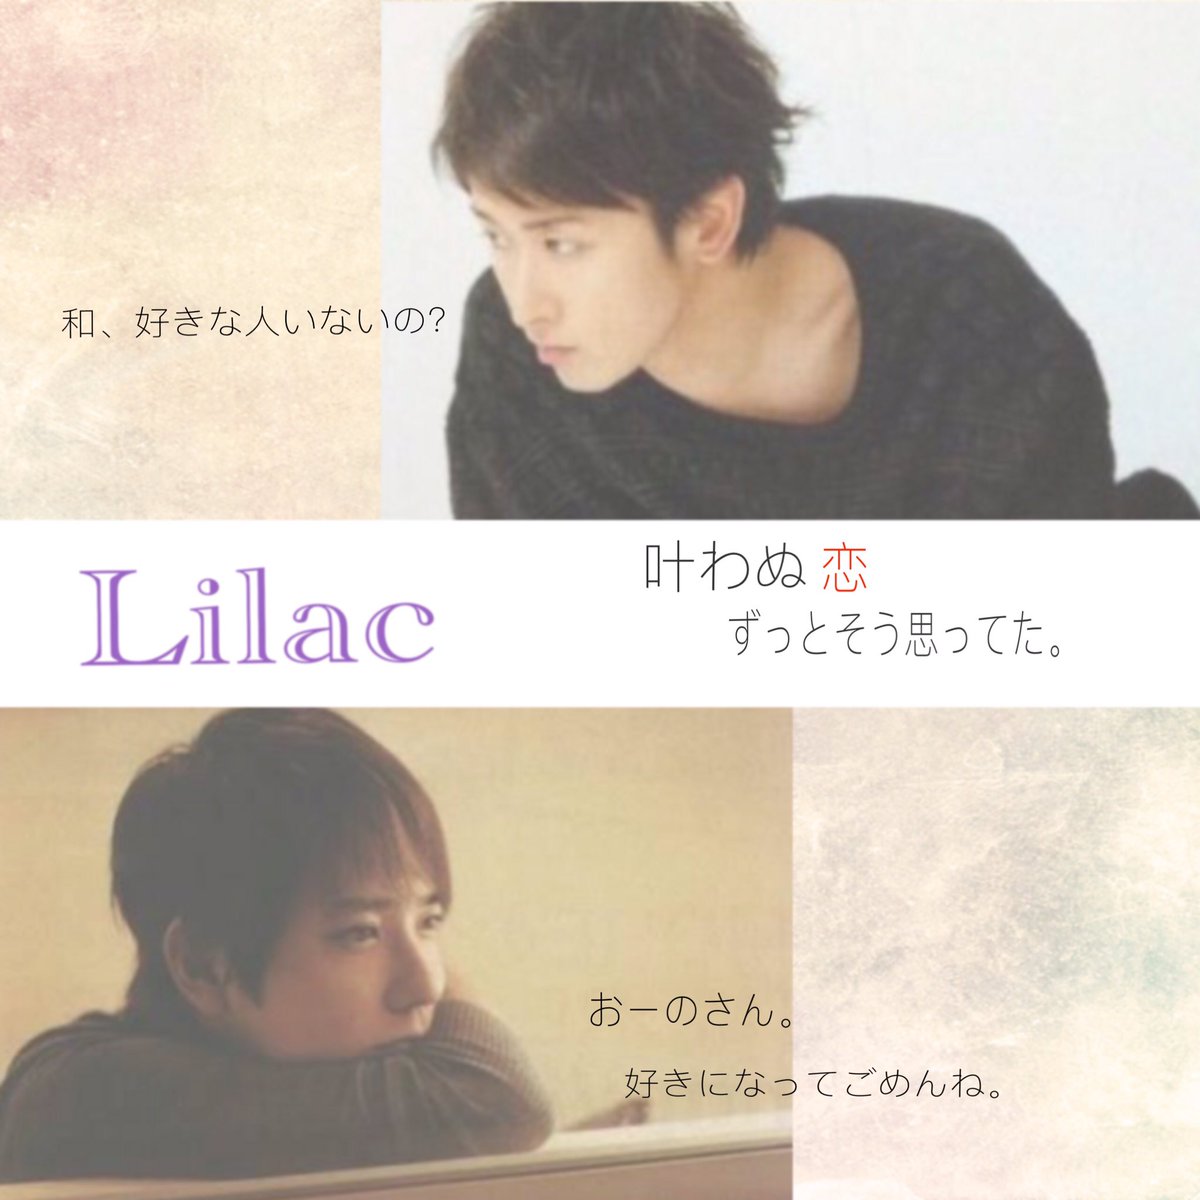 Wain Lilac 12 切甘 T Co Edv9ftutmh 切 甘 大野さんが大好きなニノちゃん 嵐privatter 妄想小説 Bl 大野智 二宮和也